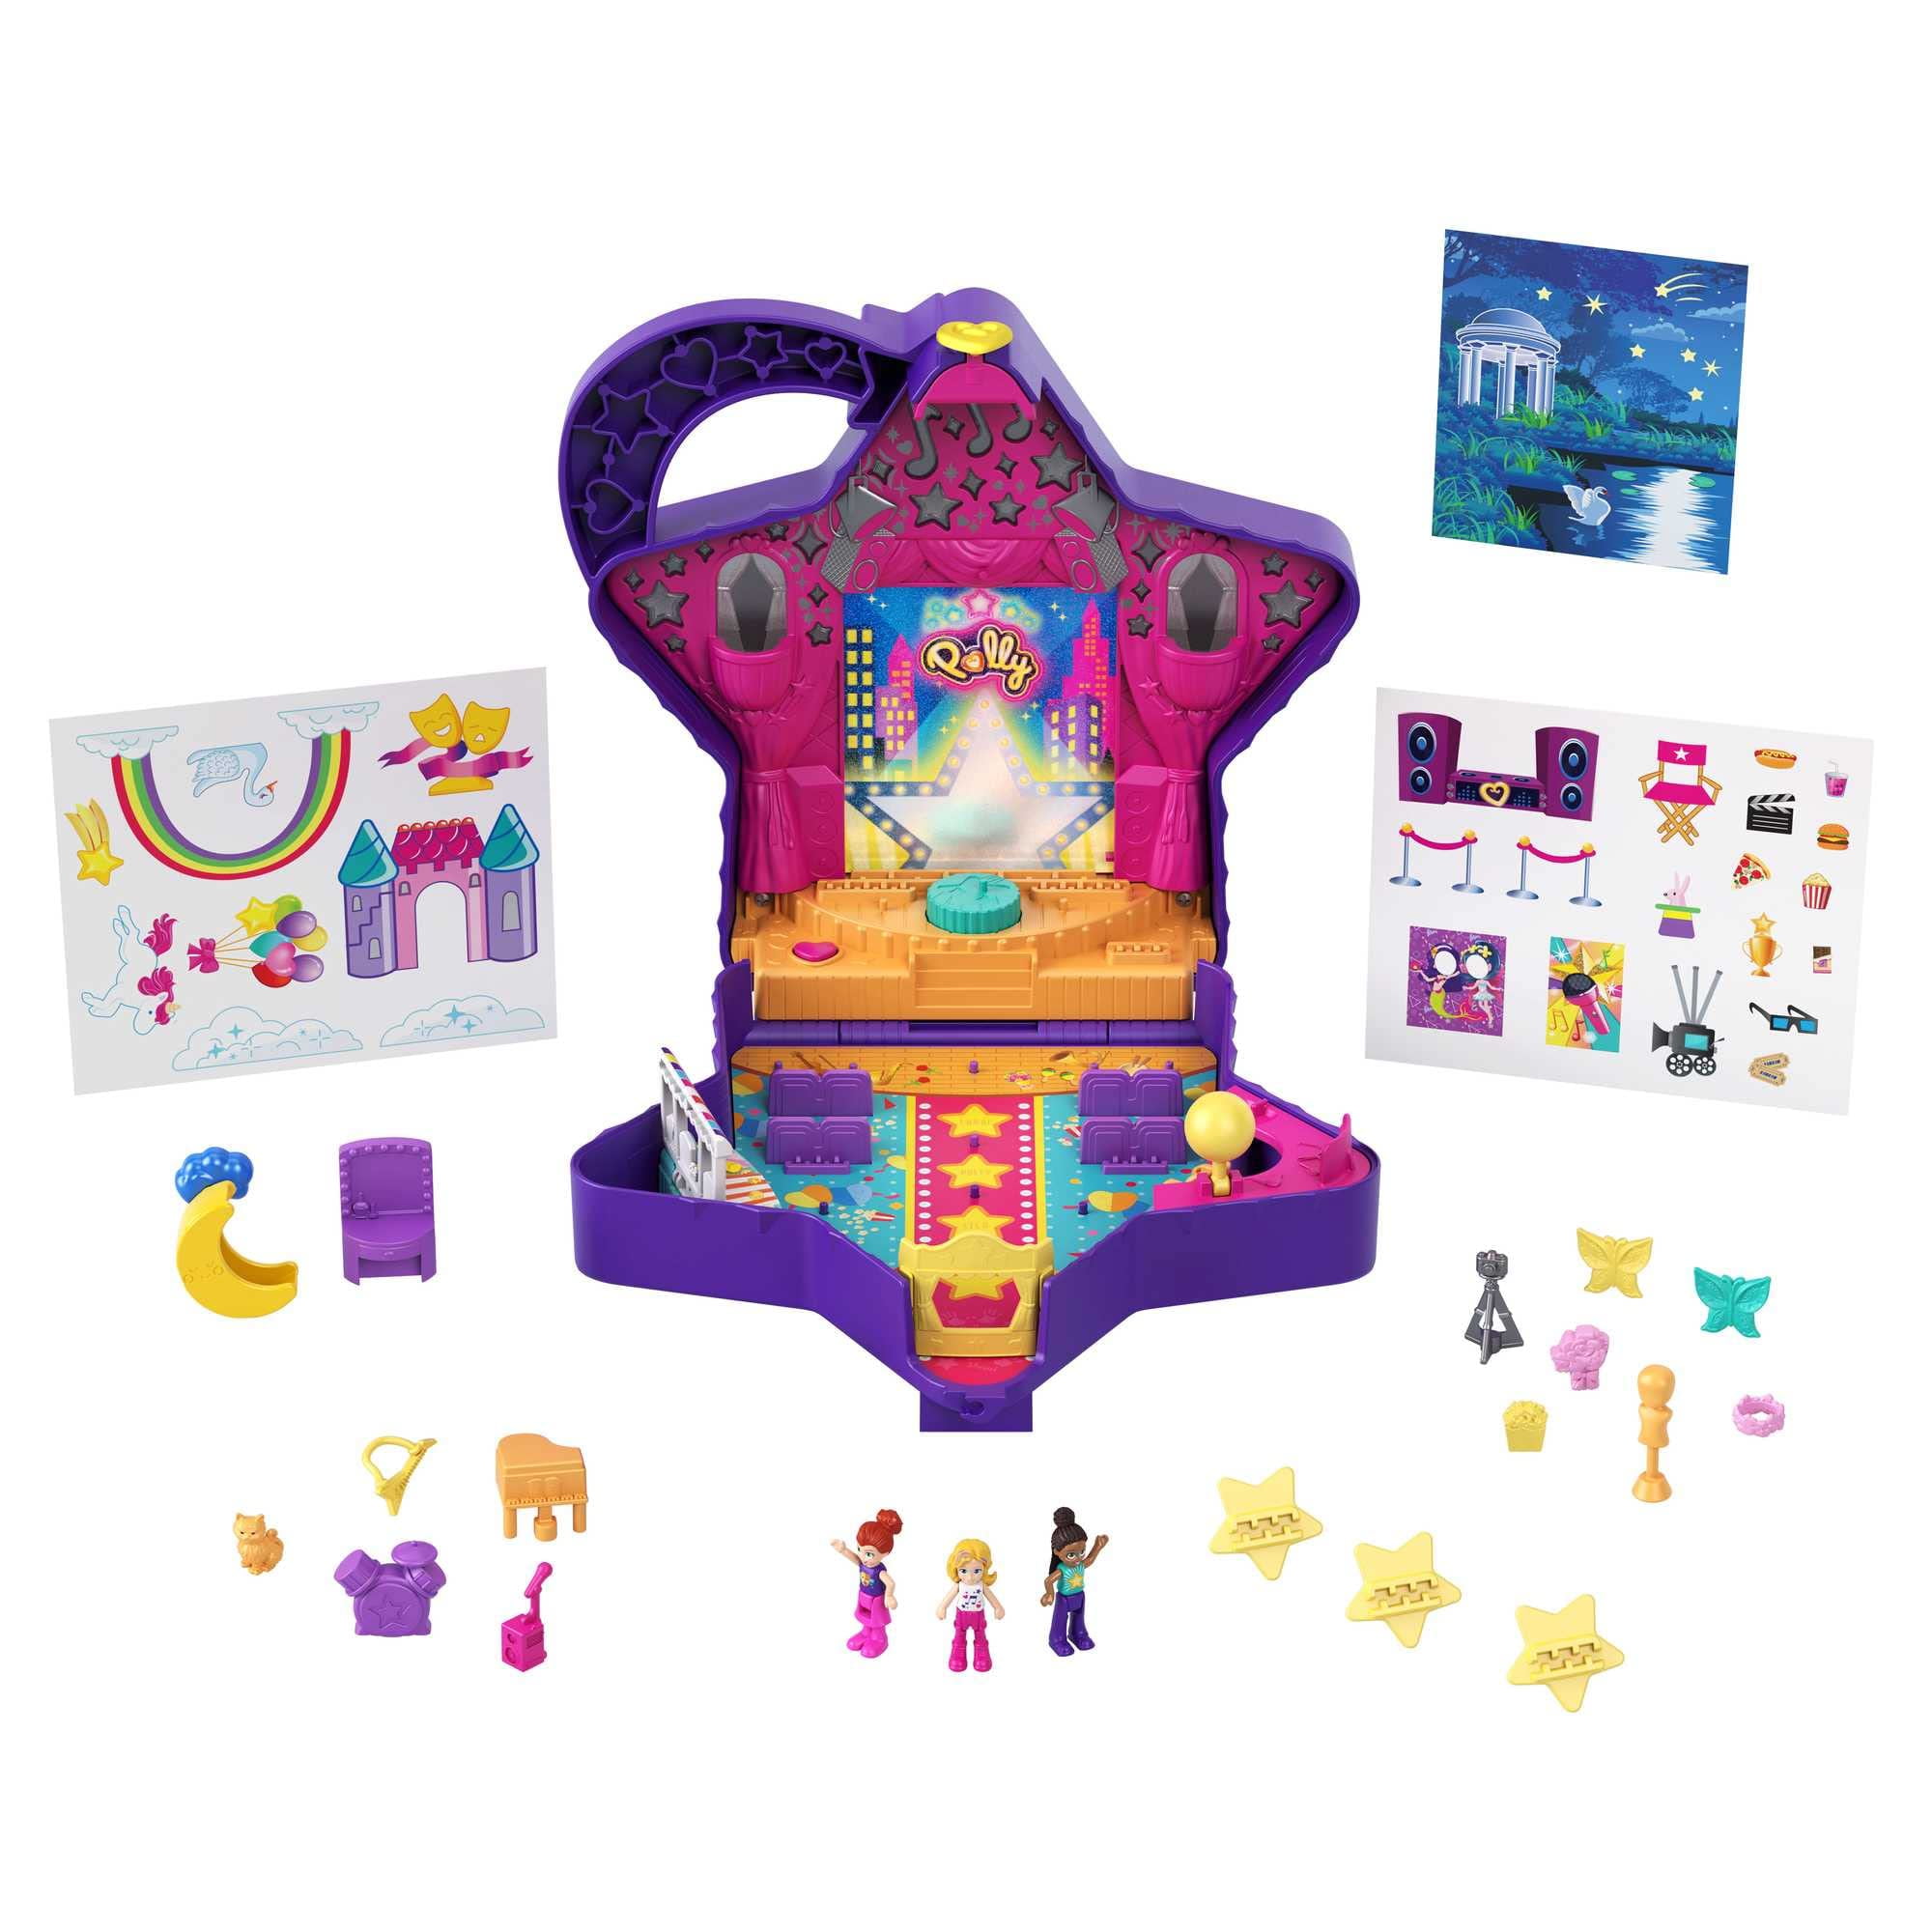 Polly Pocket Starring Shani Art Studio Compact, Micro Shani & Friend Dolls,  5 Reveals, 12 Accessories, Pop & Swap Feature, 4 & Up